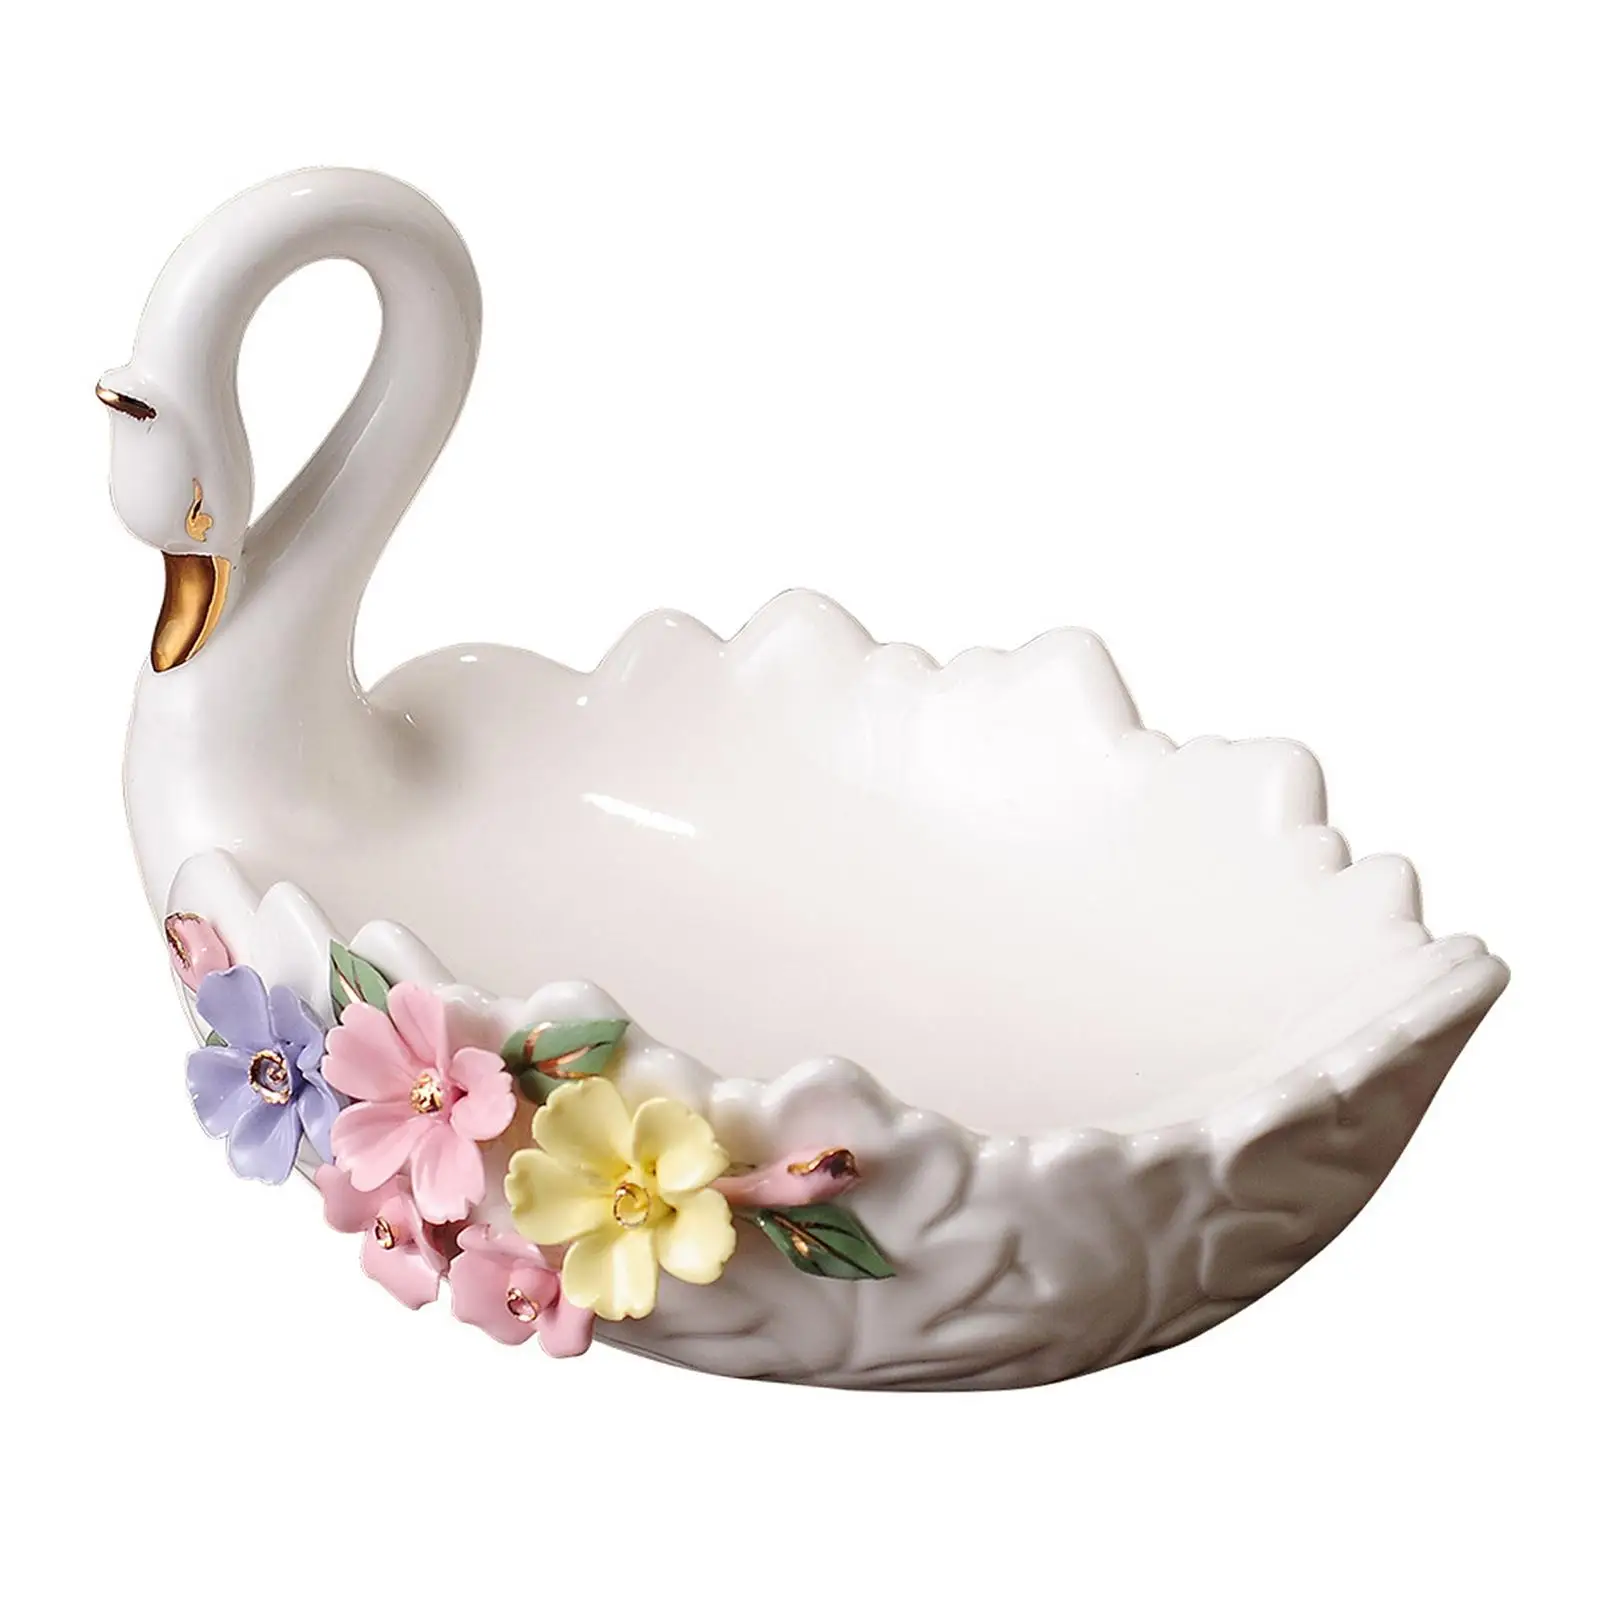 Swan Ceramic Fruit Basket Plate Snacks Modern Creative Stylish Dish Decorative Container Food Serving Tray for Salads Appetizers